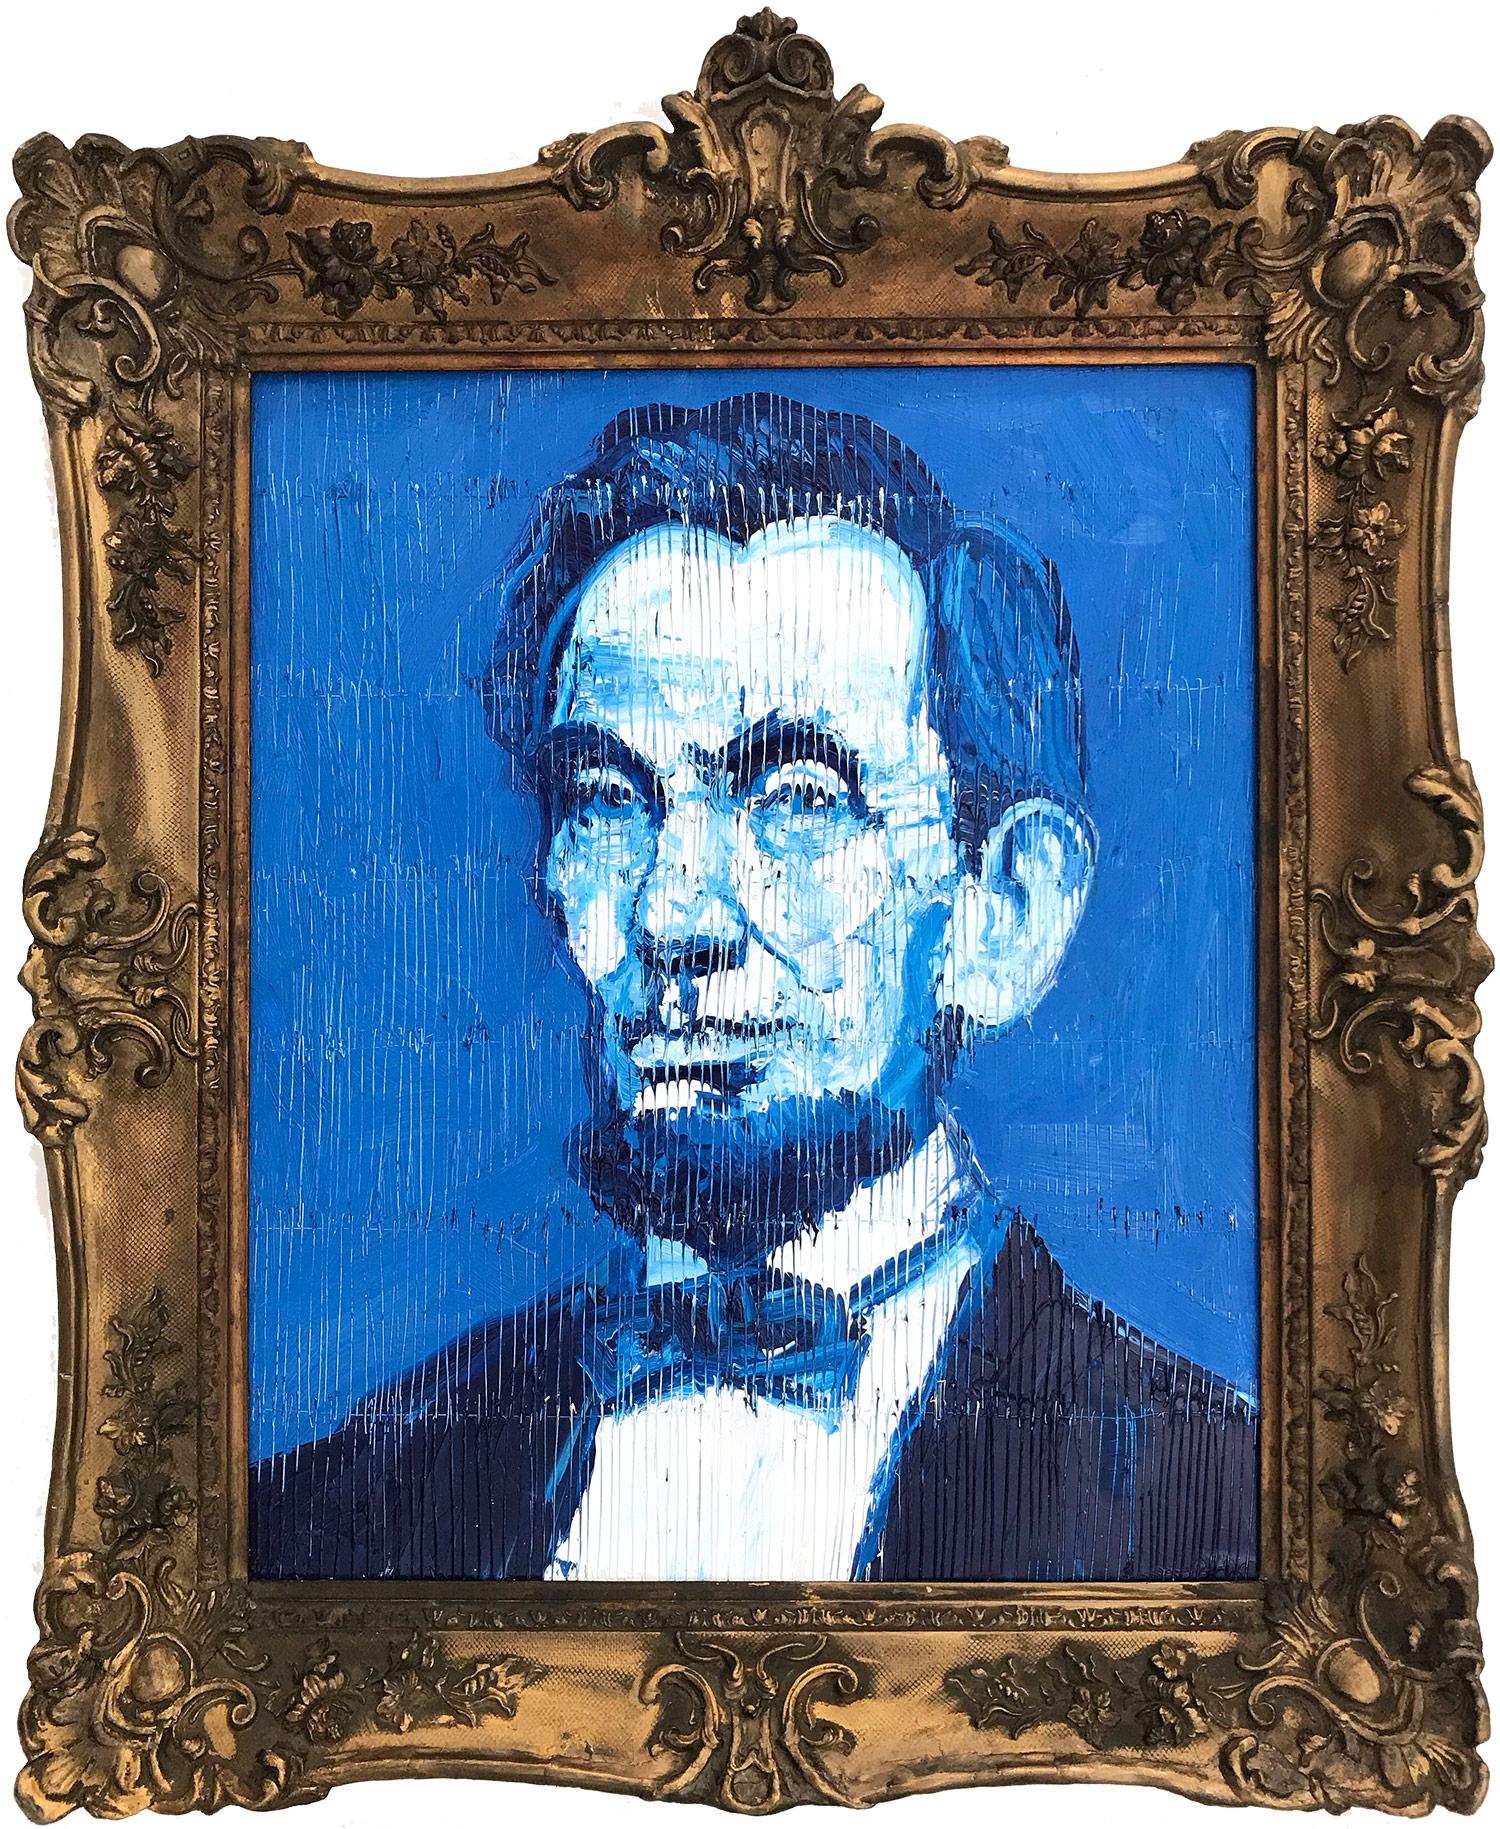 Hunt Slonem Portrait Painting - "Abraham Lincoln" (Neo-Expressionist Oil Painting in Blue Background on Canvas)